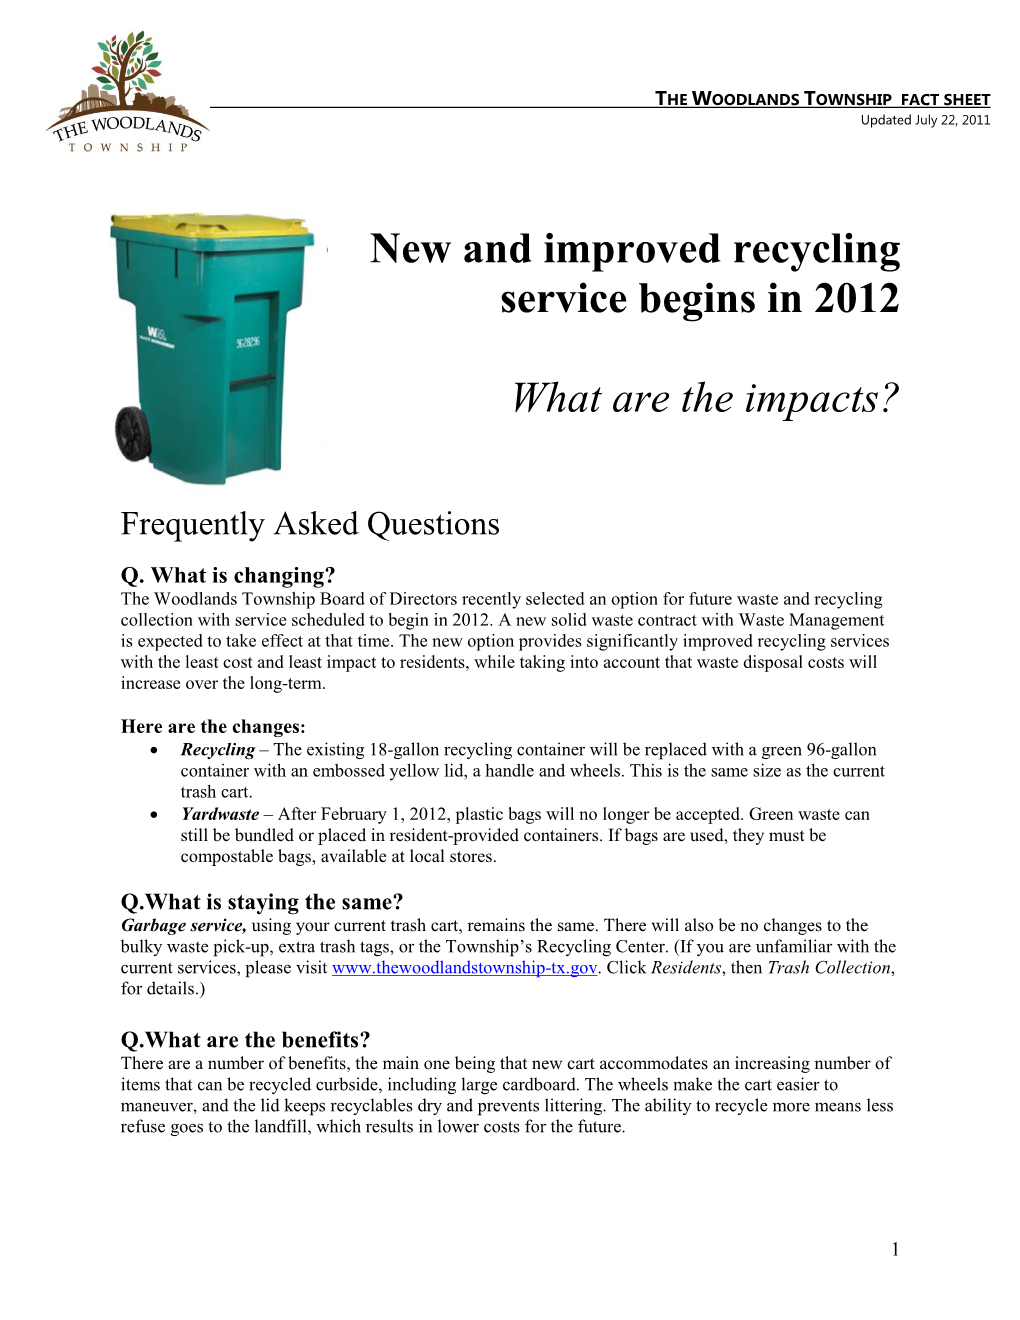 New and Improved Recycling Service Begins in 2012 What Are the Impacts?